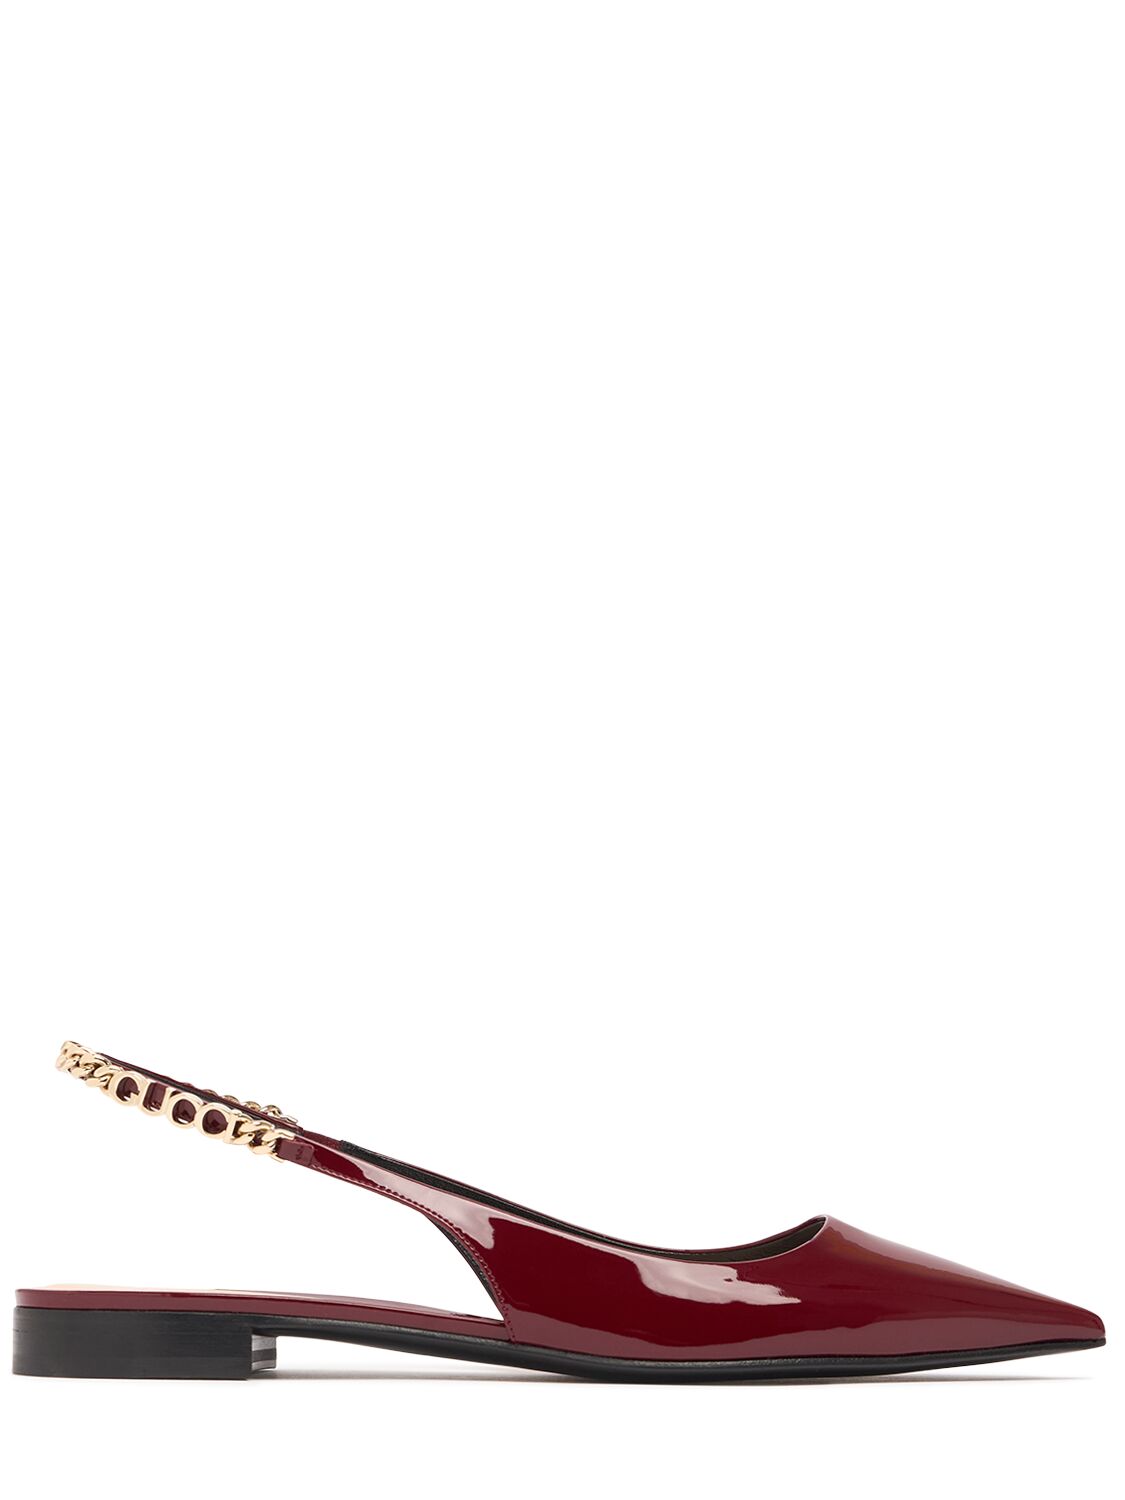 Gucci 15mm Signoria Leather Slingback Flats In Red